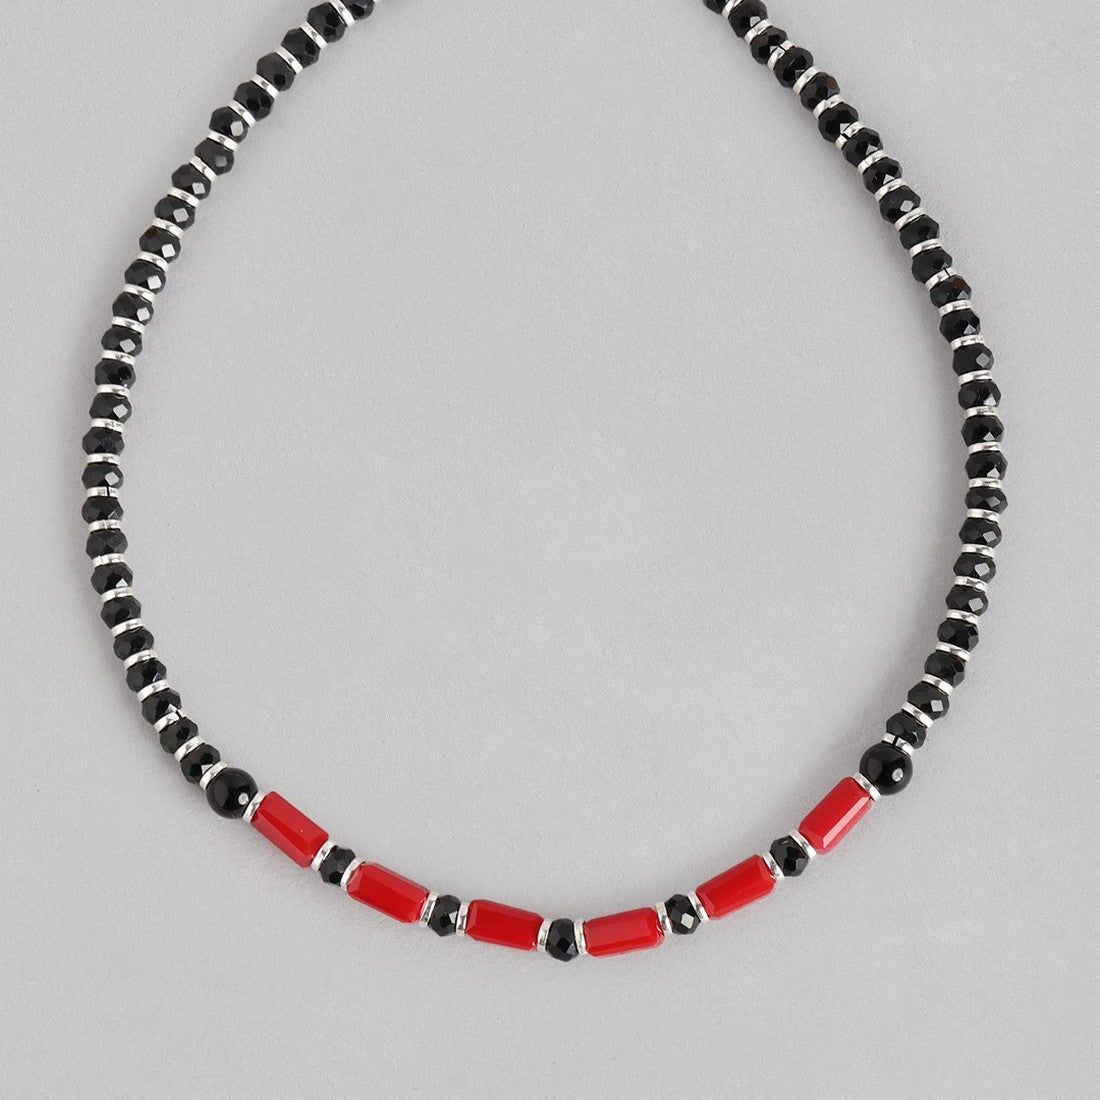 Classic Black & Red Beaded 925 Sterling Silver Anklet